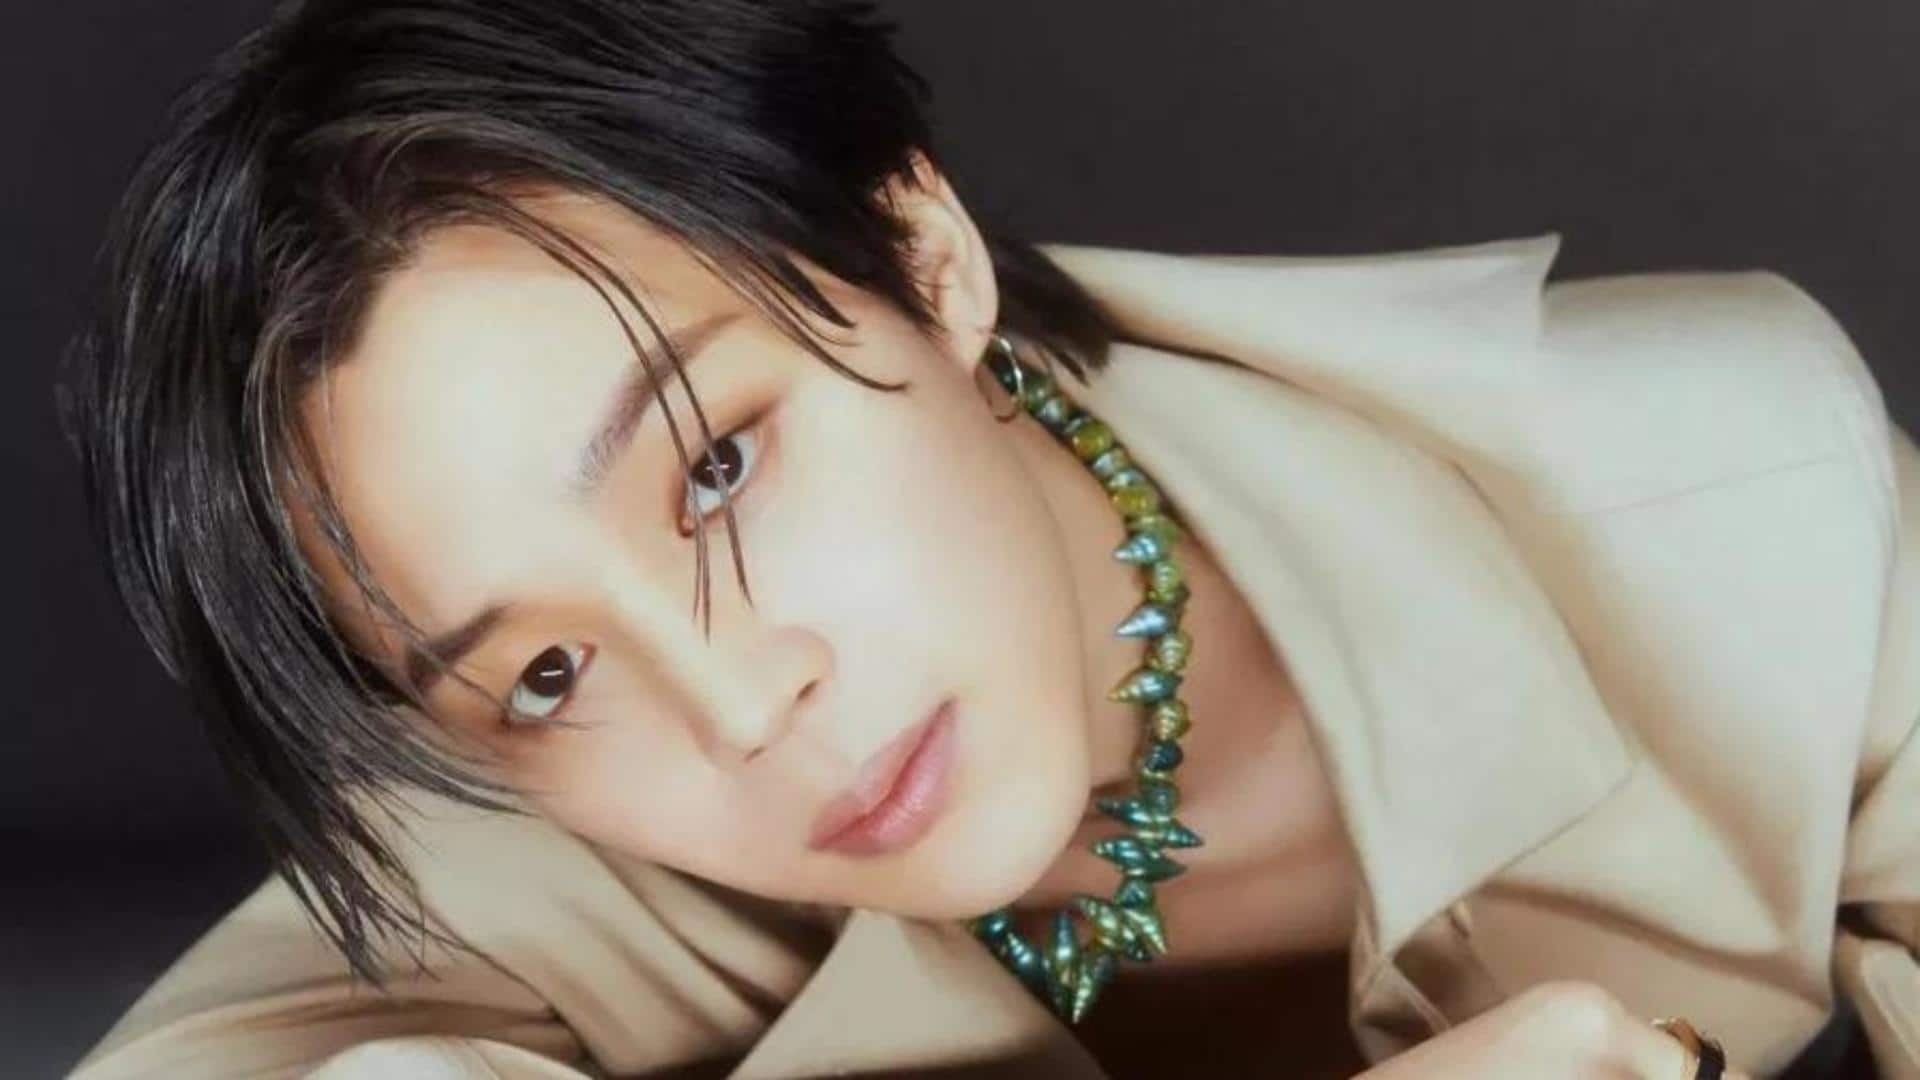 Everything to know about BTS Jimin's first solo album 'FACE'